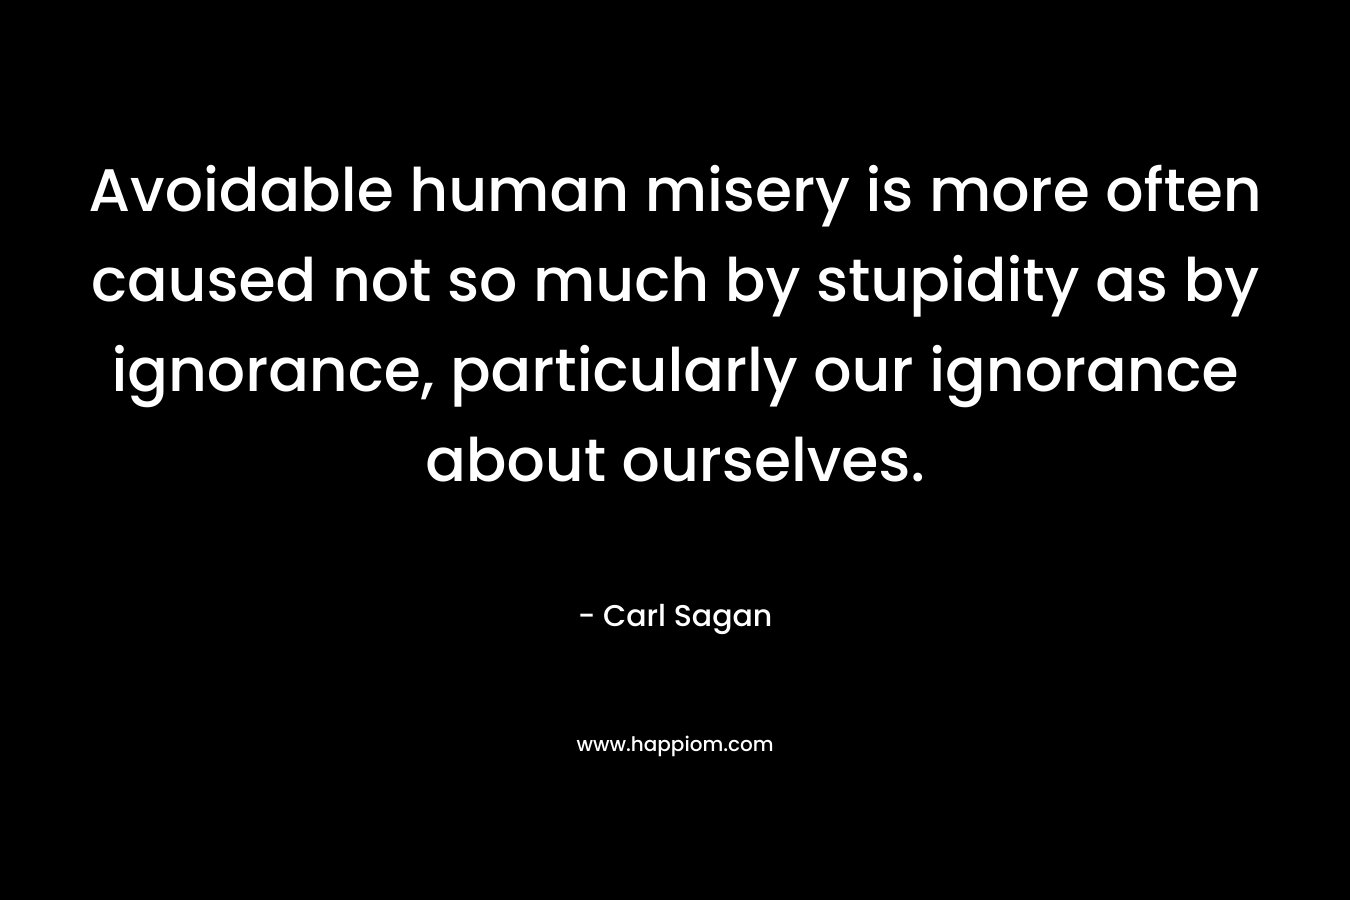 Avoidable human misery is more often caused not so much by stupidity as by ignorance, particularly our ignorance about ourselves.